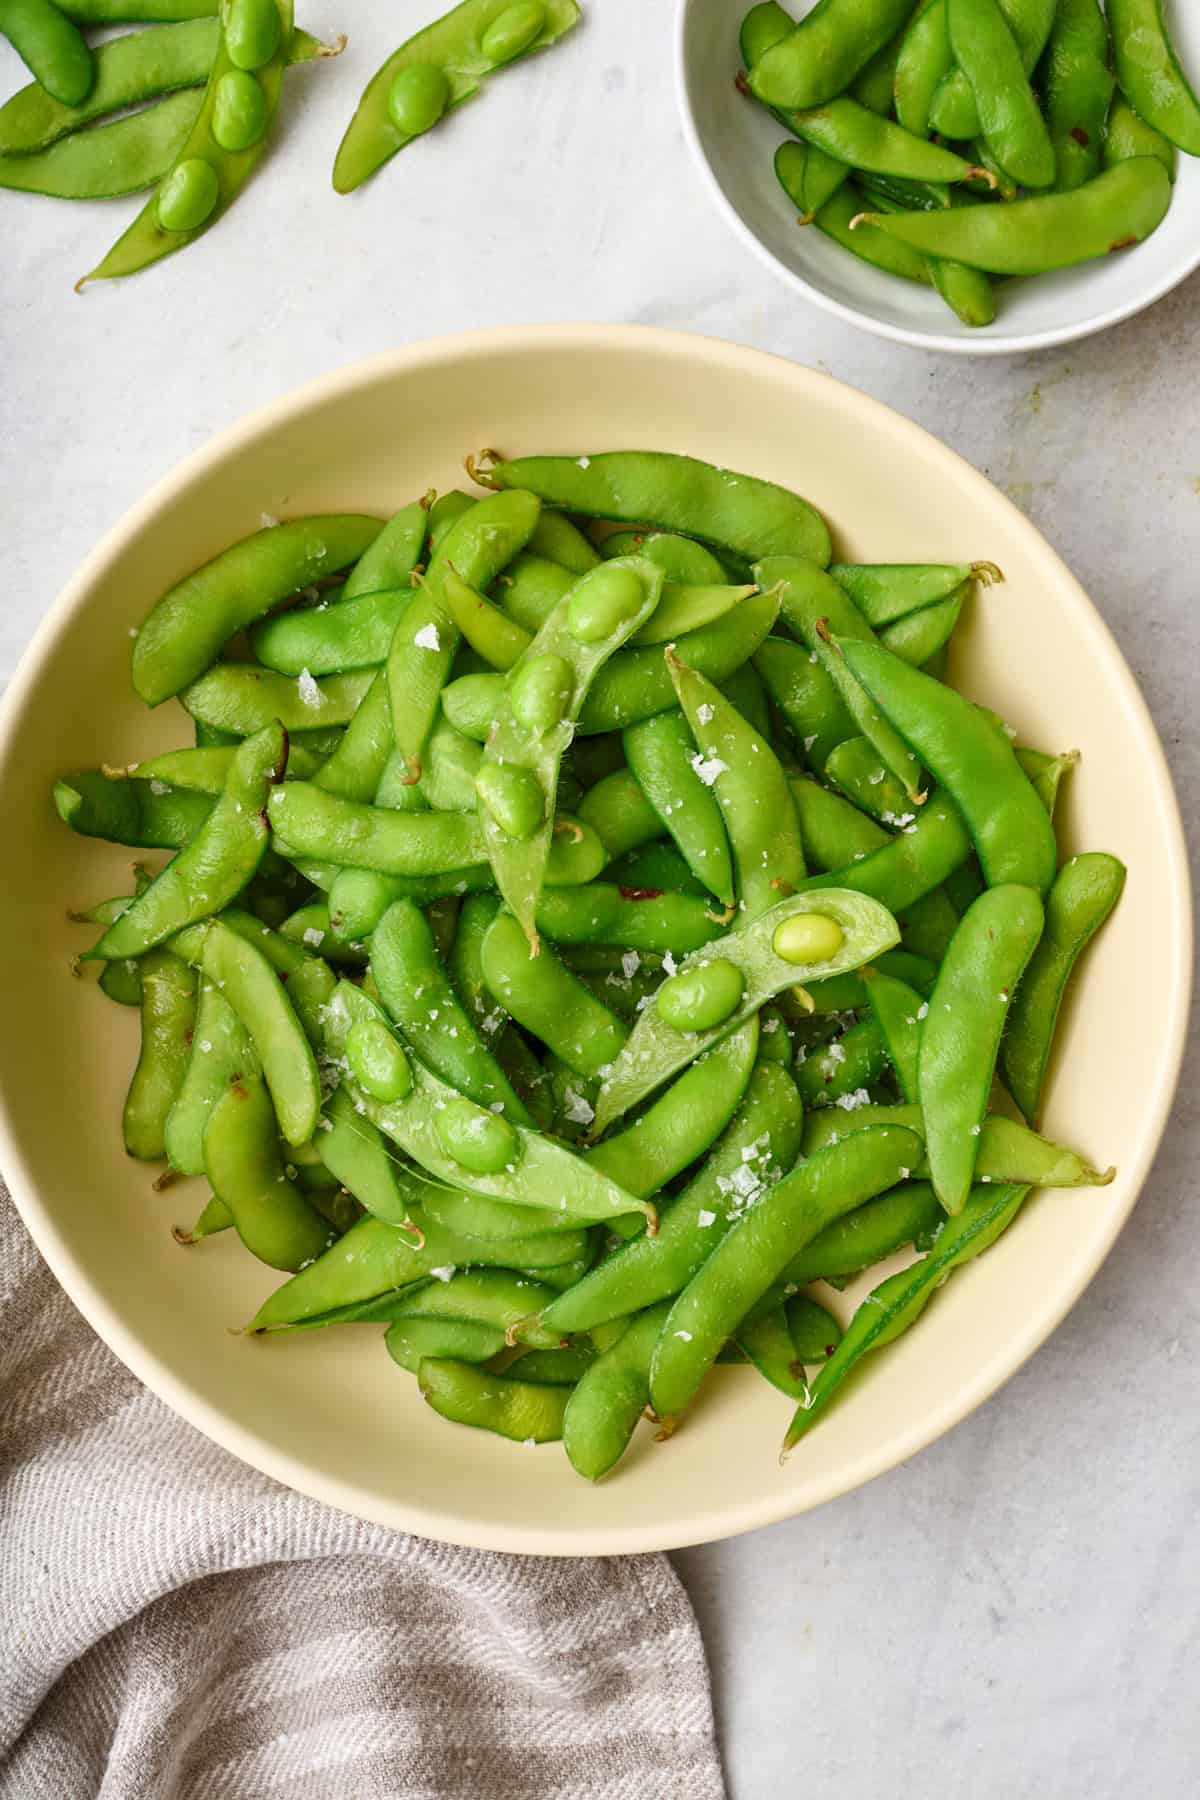 Cooked edamame pods in a bowl.